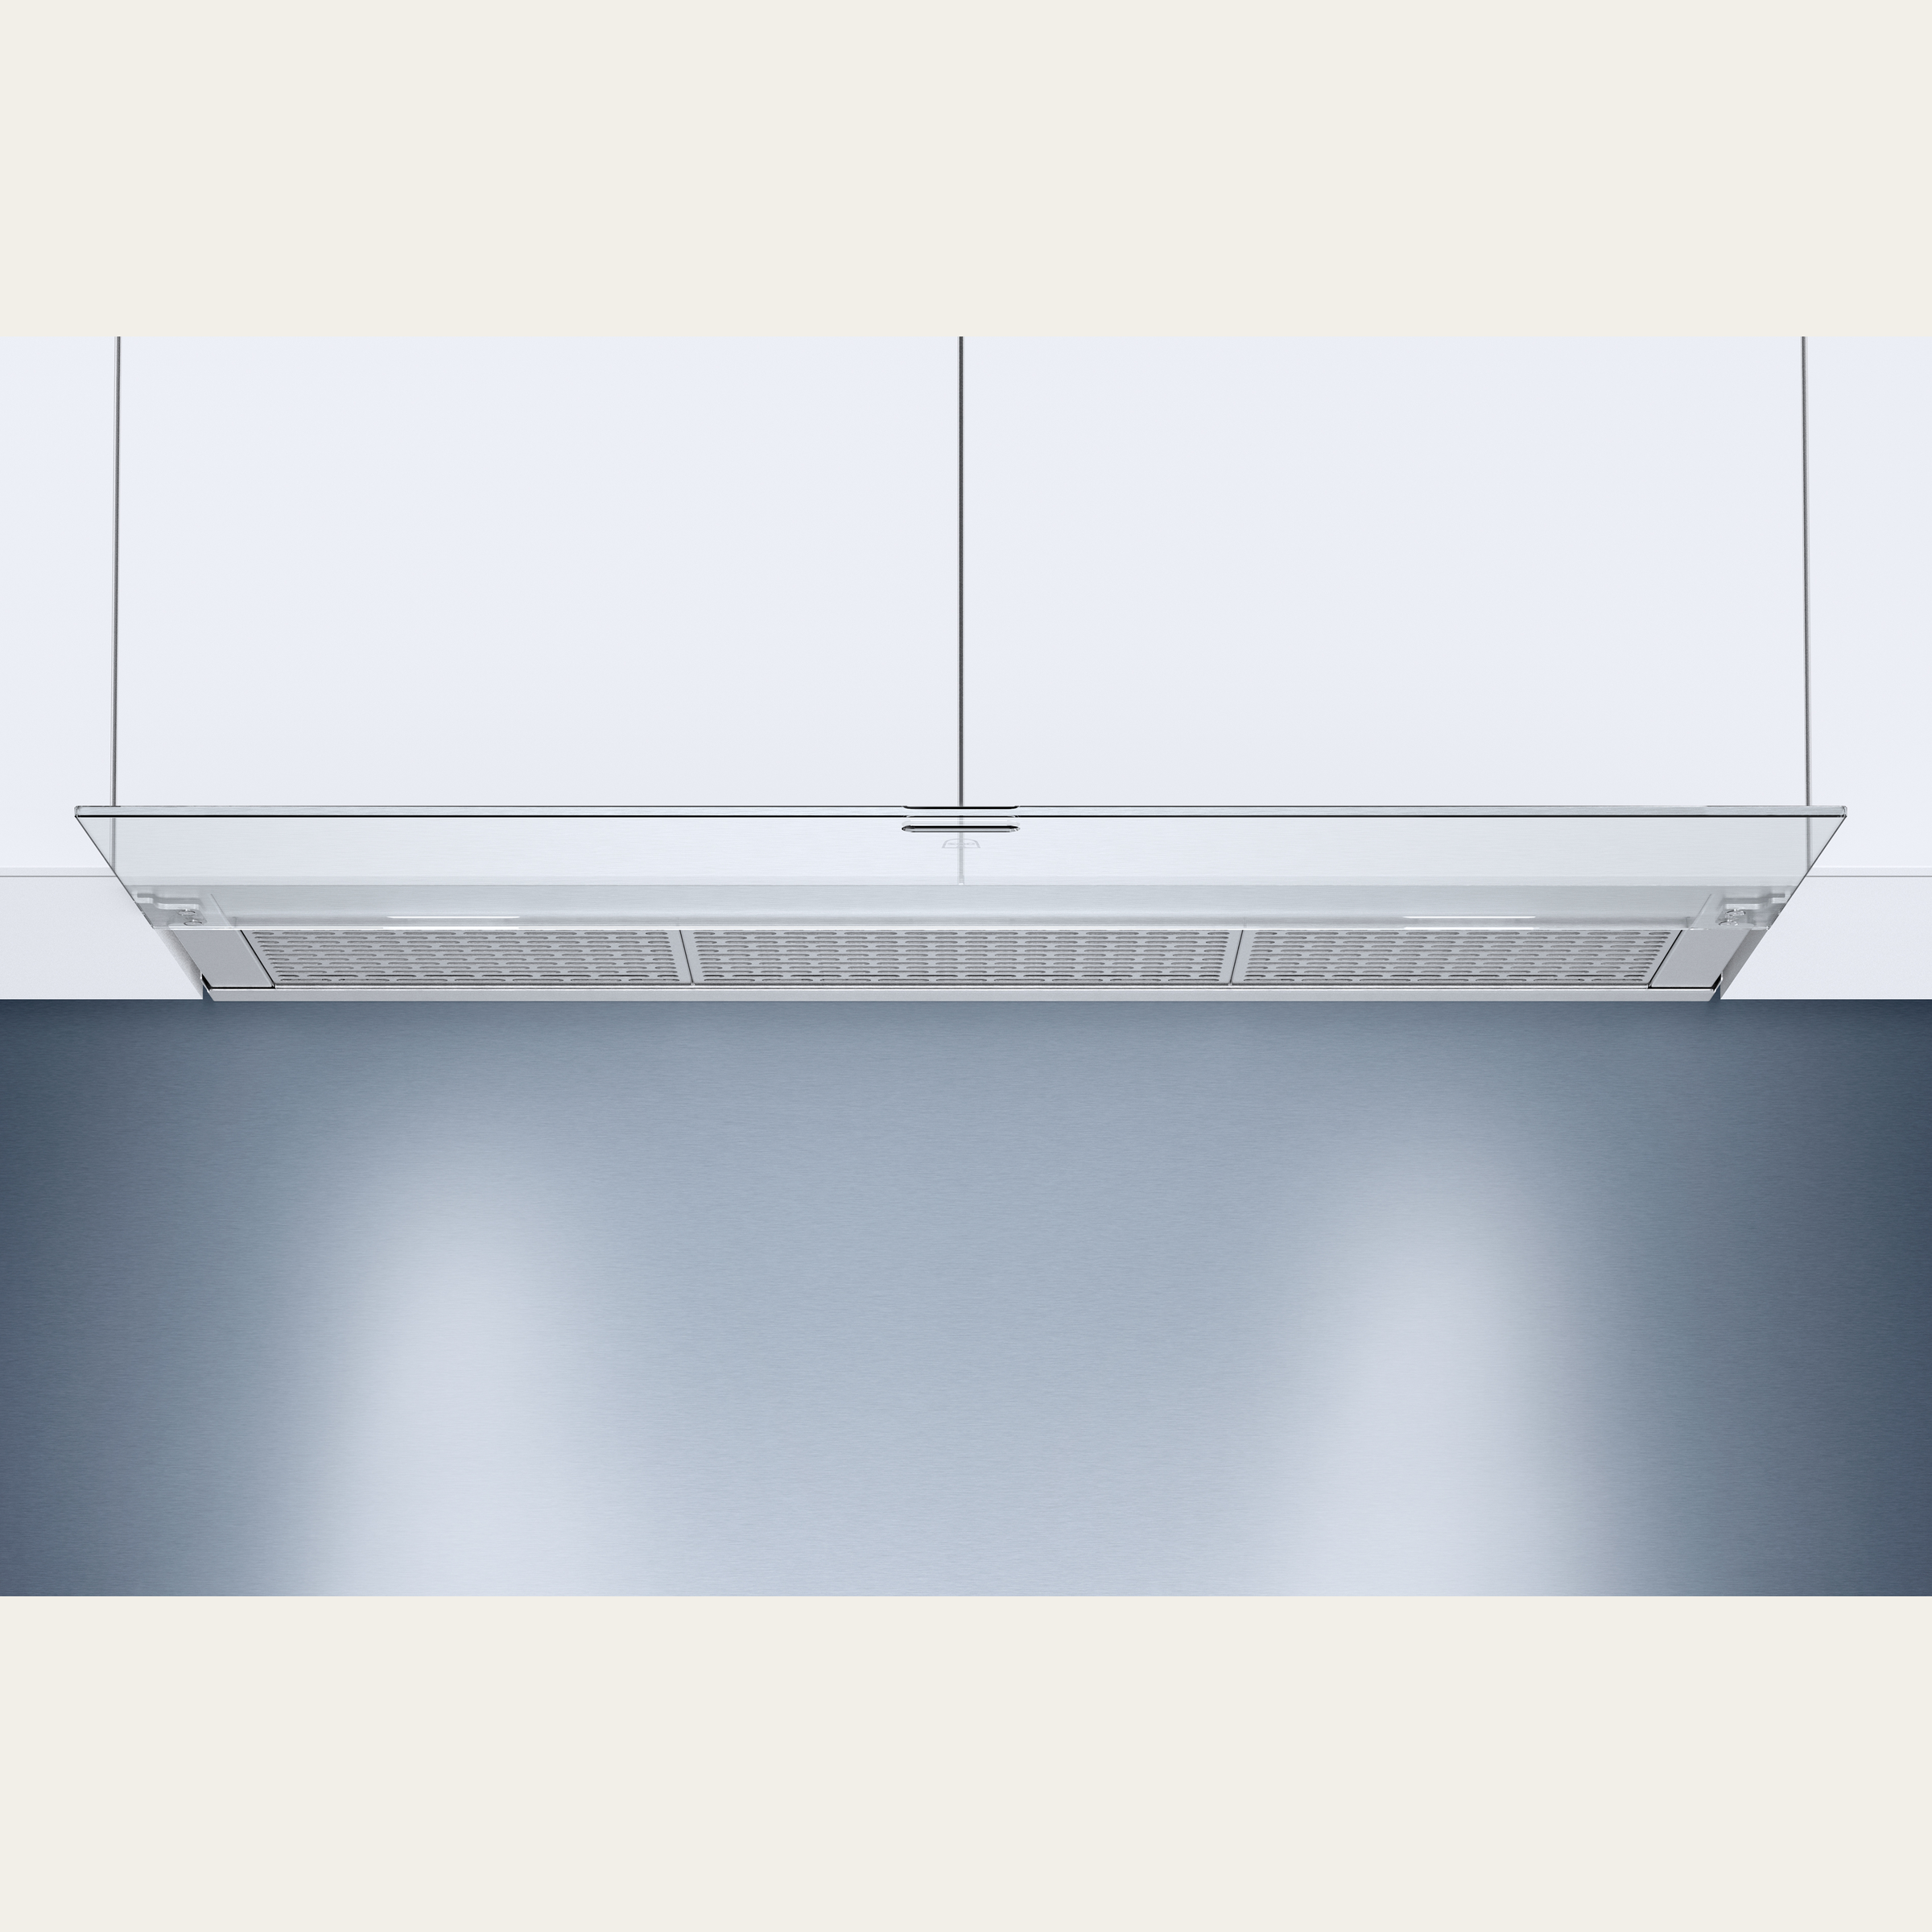 V-ZUG Range hood, AiroClearCabinet V6000, Standard width: 120.0 cm, ChromeClass, OptiLink, Energy efficiency rating: A+, Extracted air, TouchControl, integrated range hood